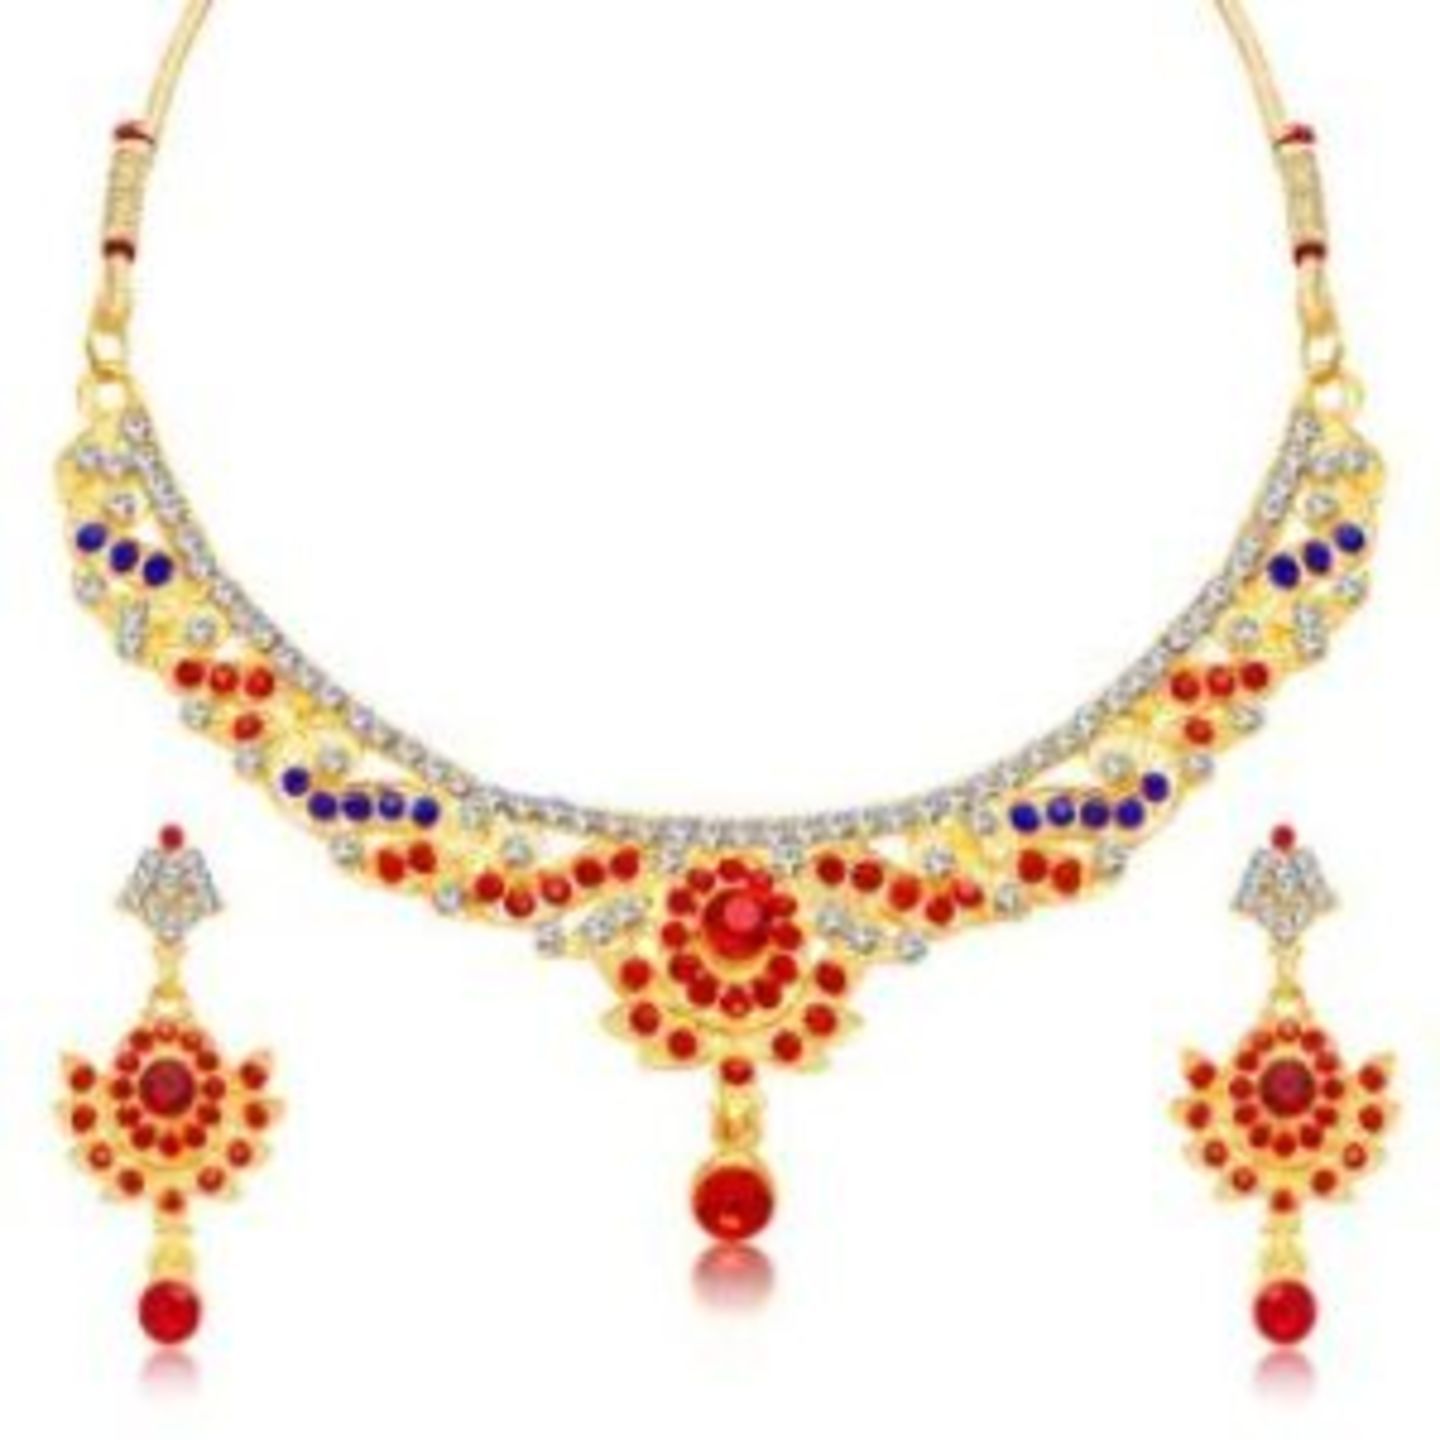 Ethnic Necklace set with earrings